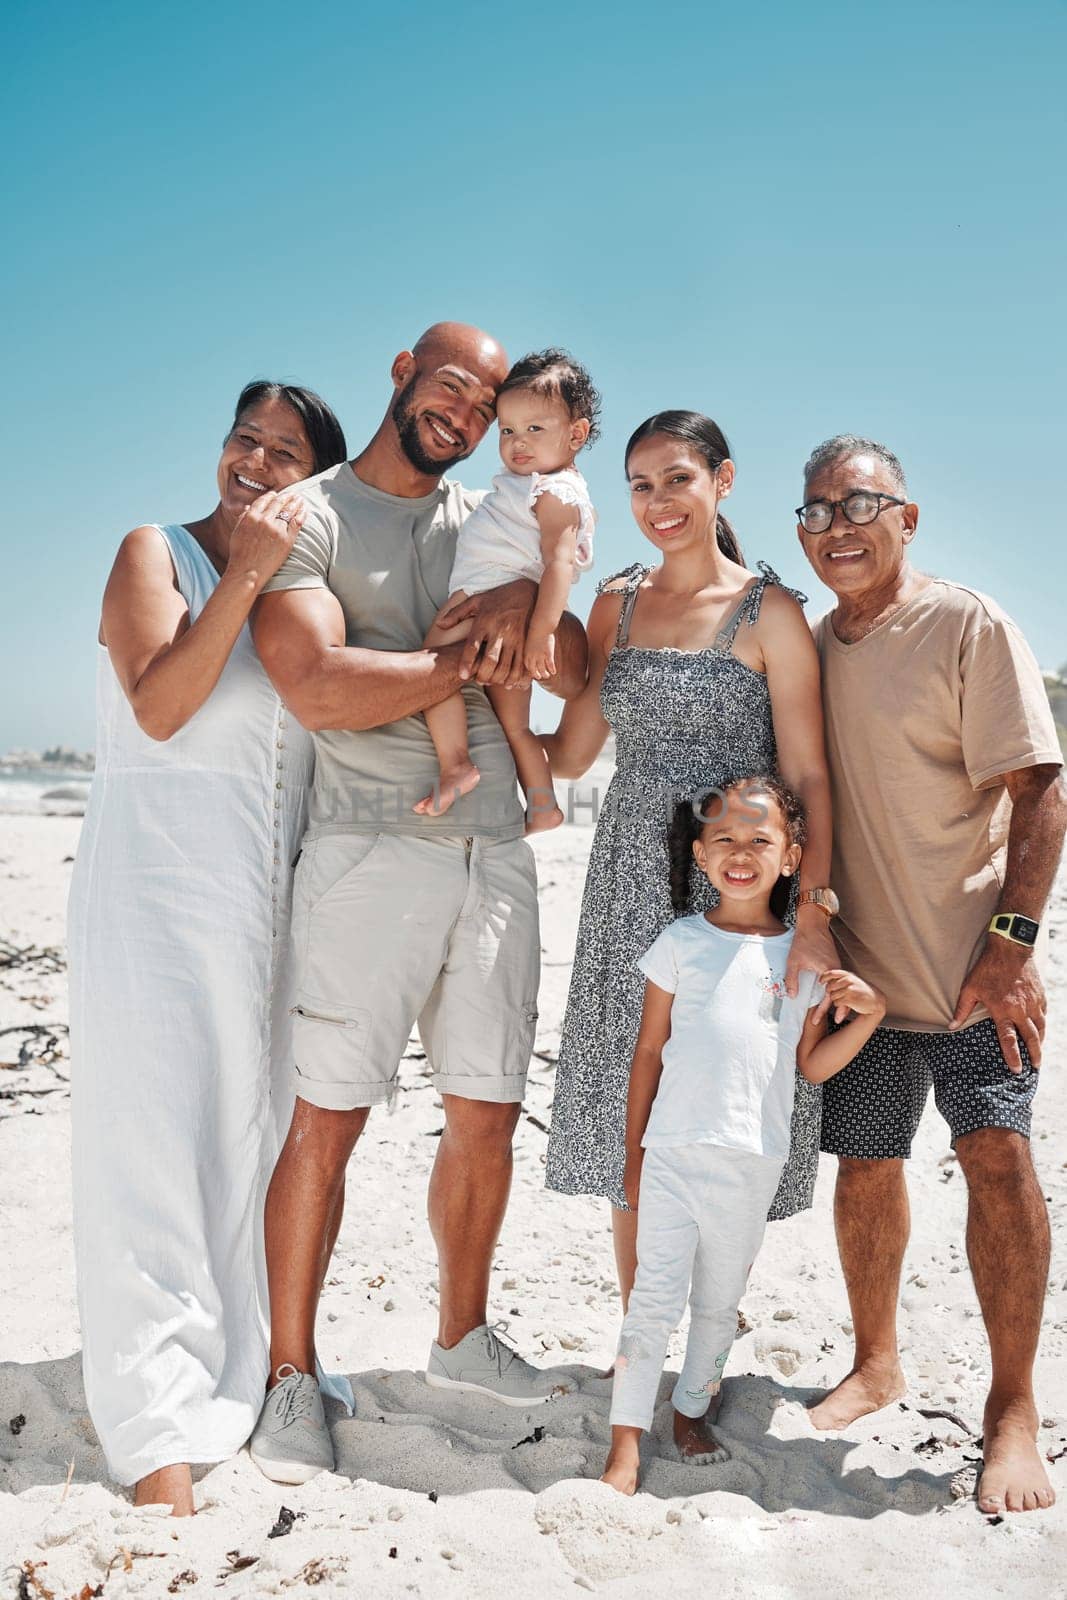 Big family, portrait and smile on beach holiday, vacation or Mexico summer trip. Generations, parents and children on sandy, sea or ocean shore having fun, bonding and spending quality time together